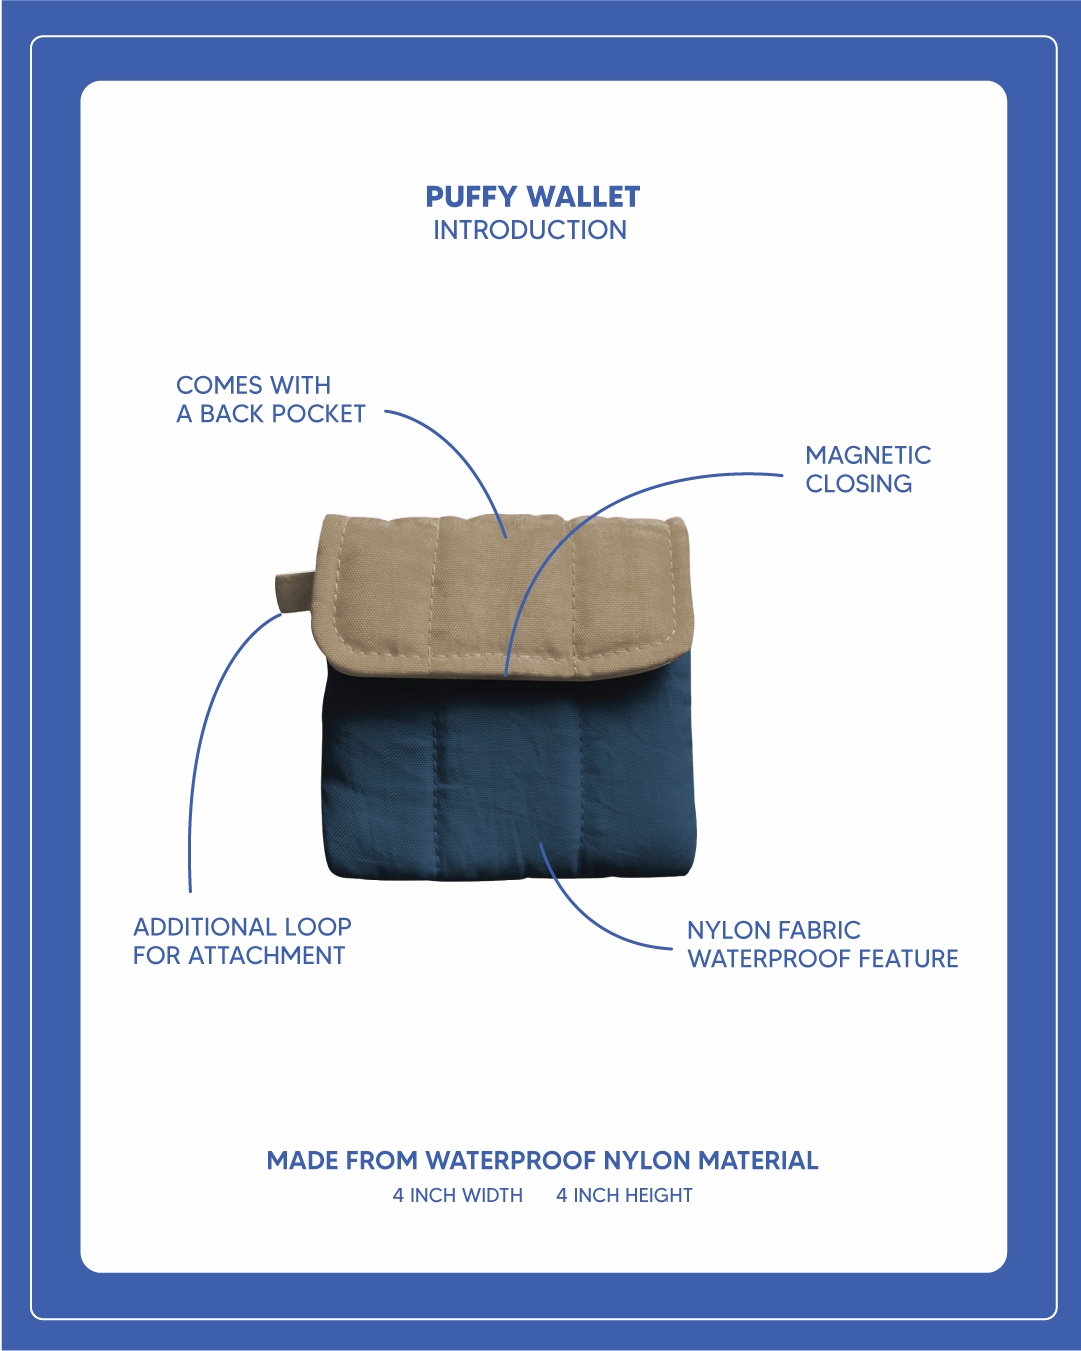 Puffy Wallet - Yellow Navy